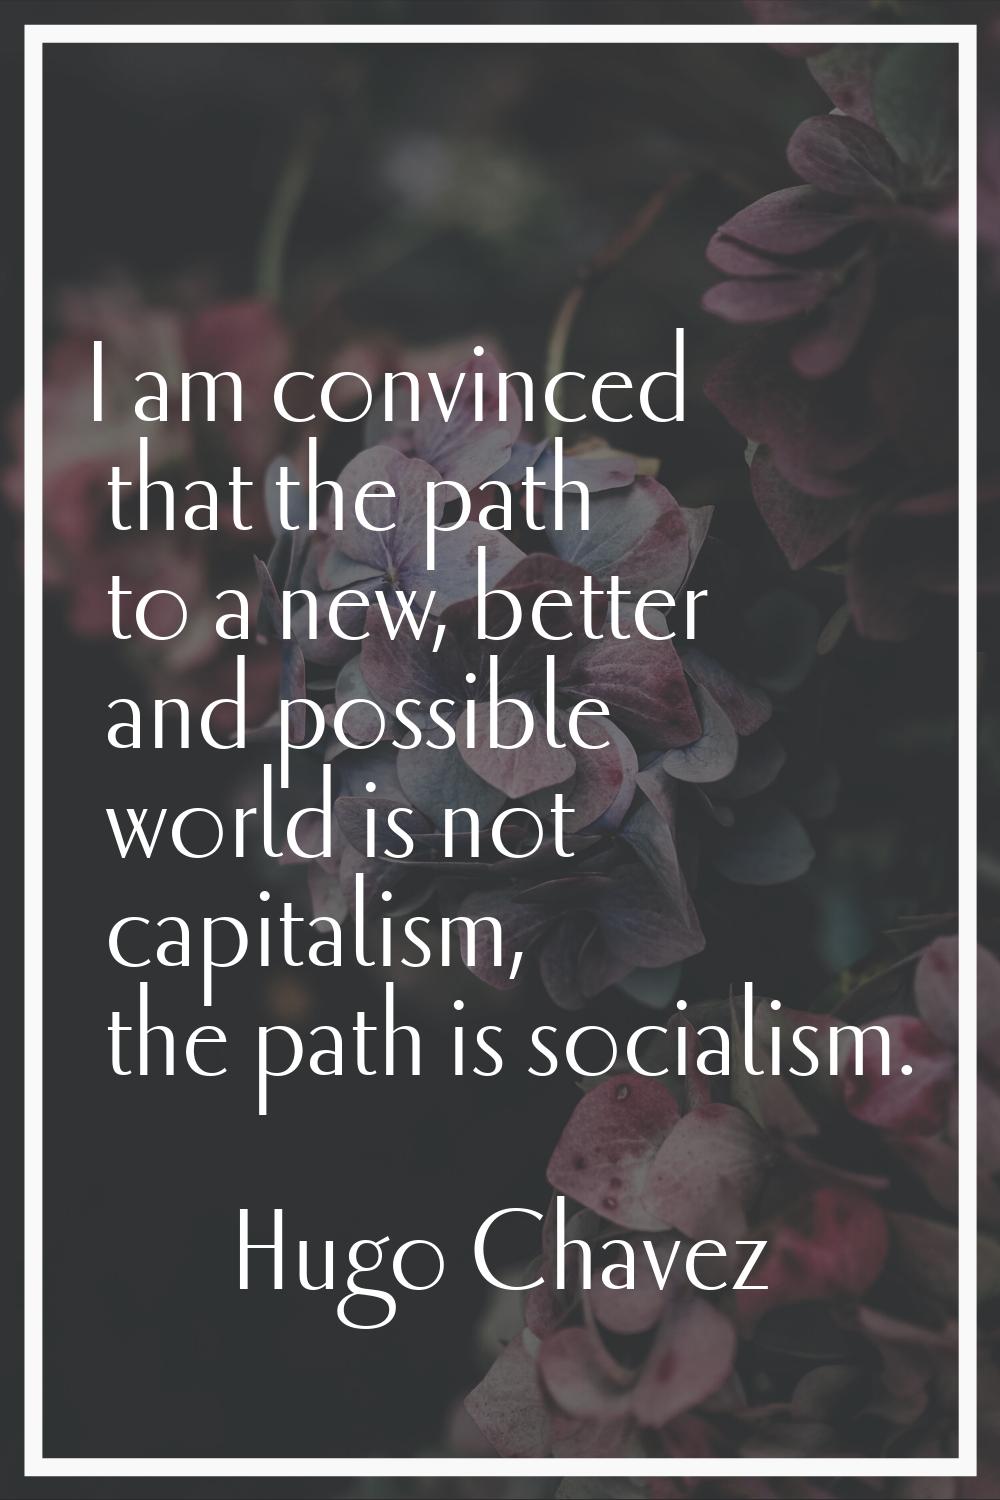 I am convinced that the path to a new, better and possible world is not capitalism, the path is soc